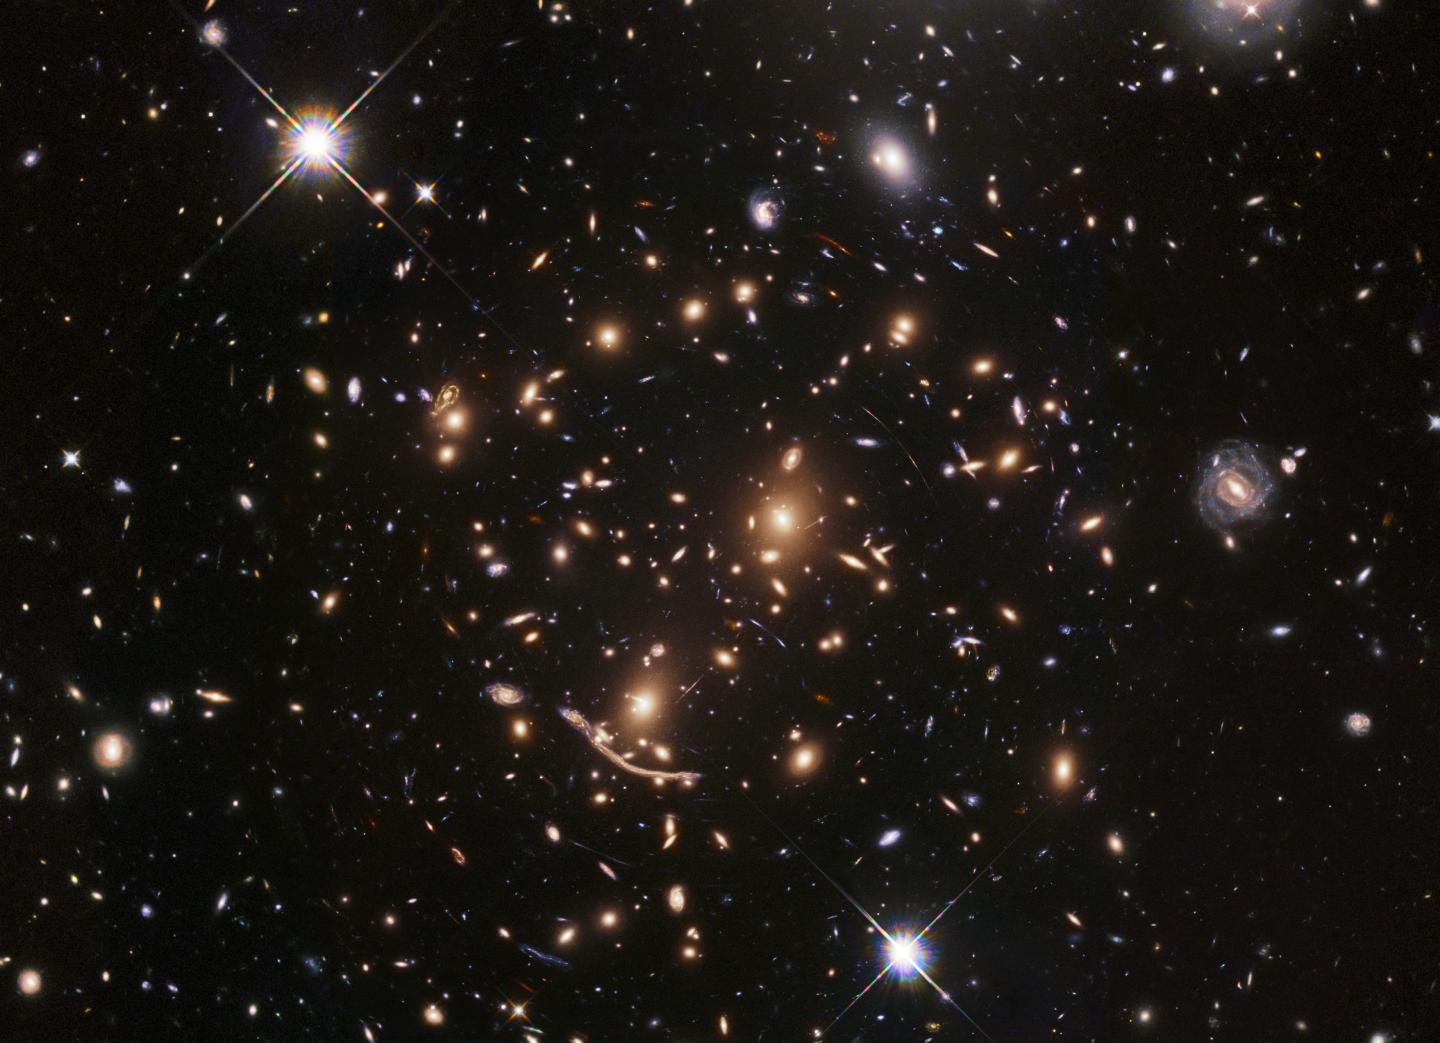 The galaxy cluster Abell 370 was the first target of the BUFFALO survey, which will search for some of the first galaxies in the universe